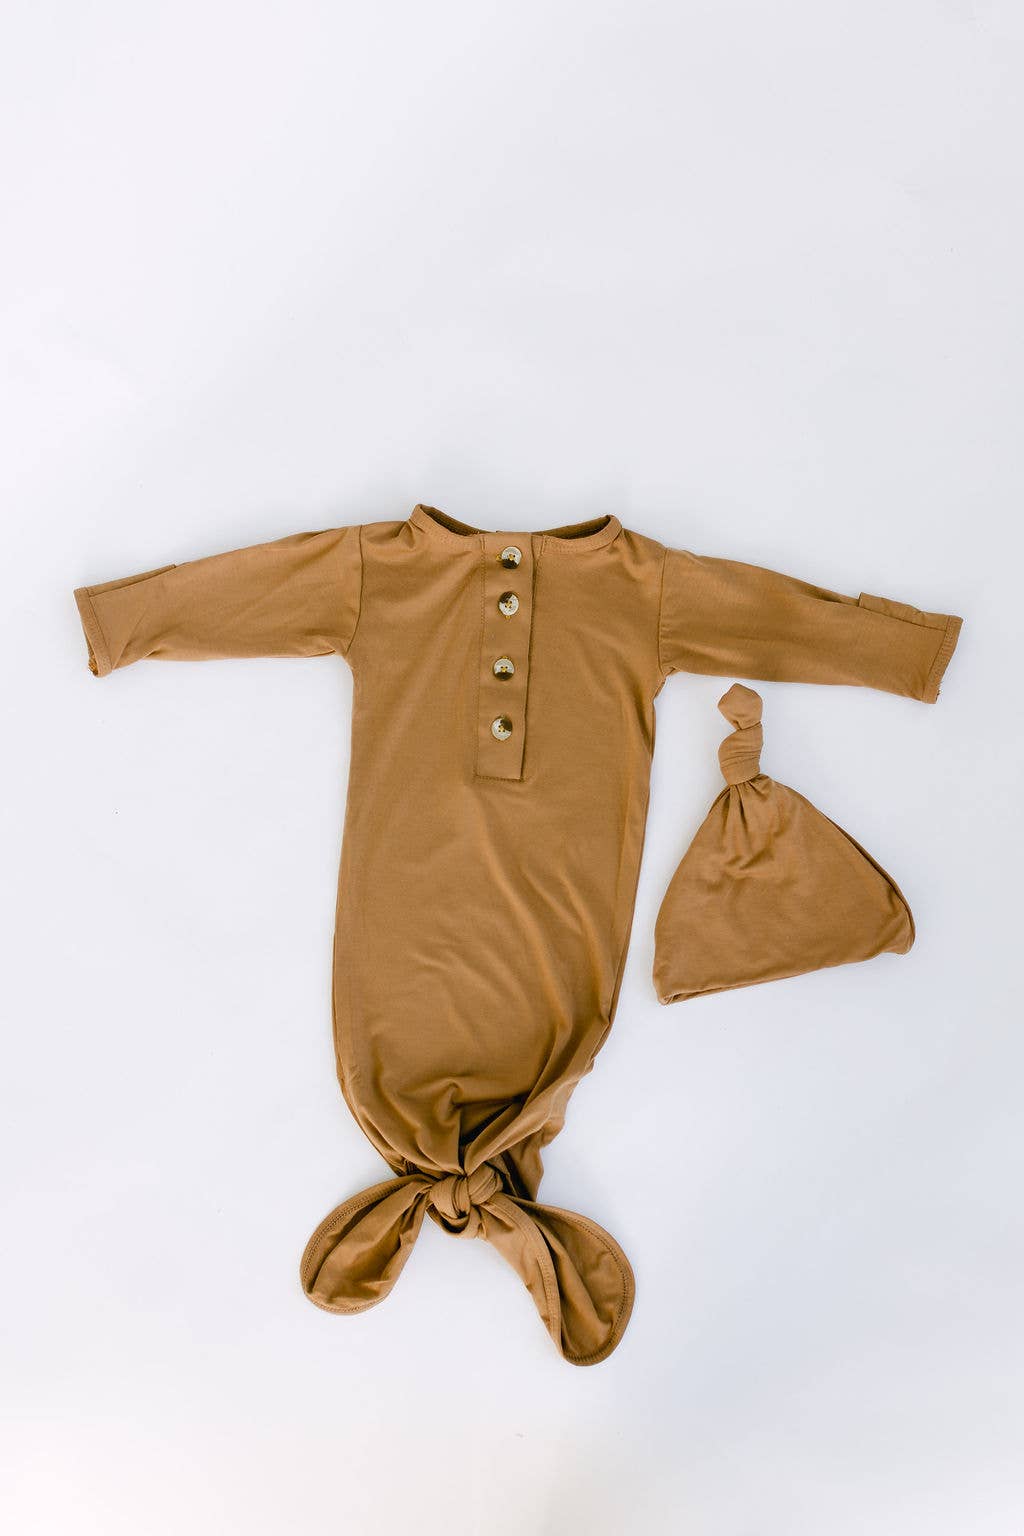 Stroller Society Knotted Baby Gown and Hat Set (Newborn - 3 mo.) - Camel Brown